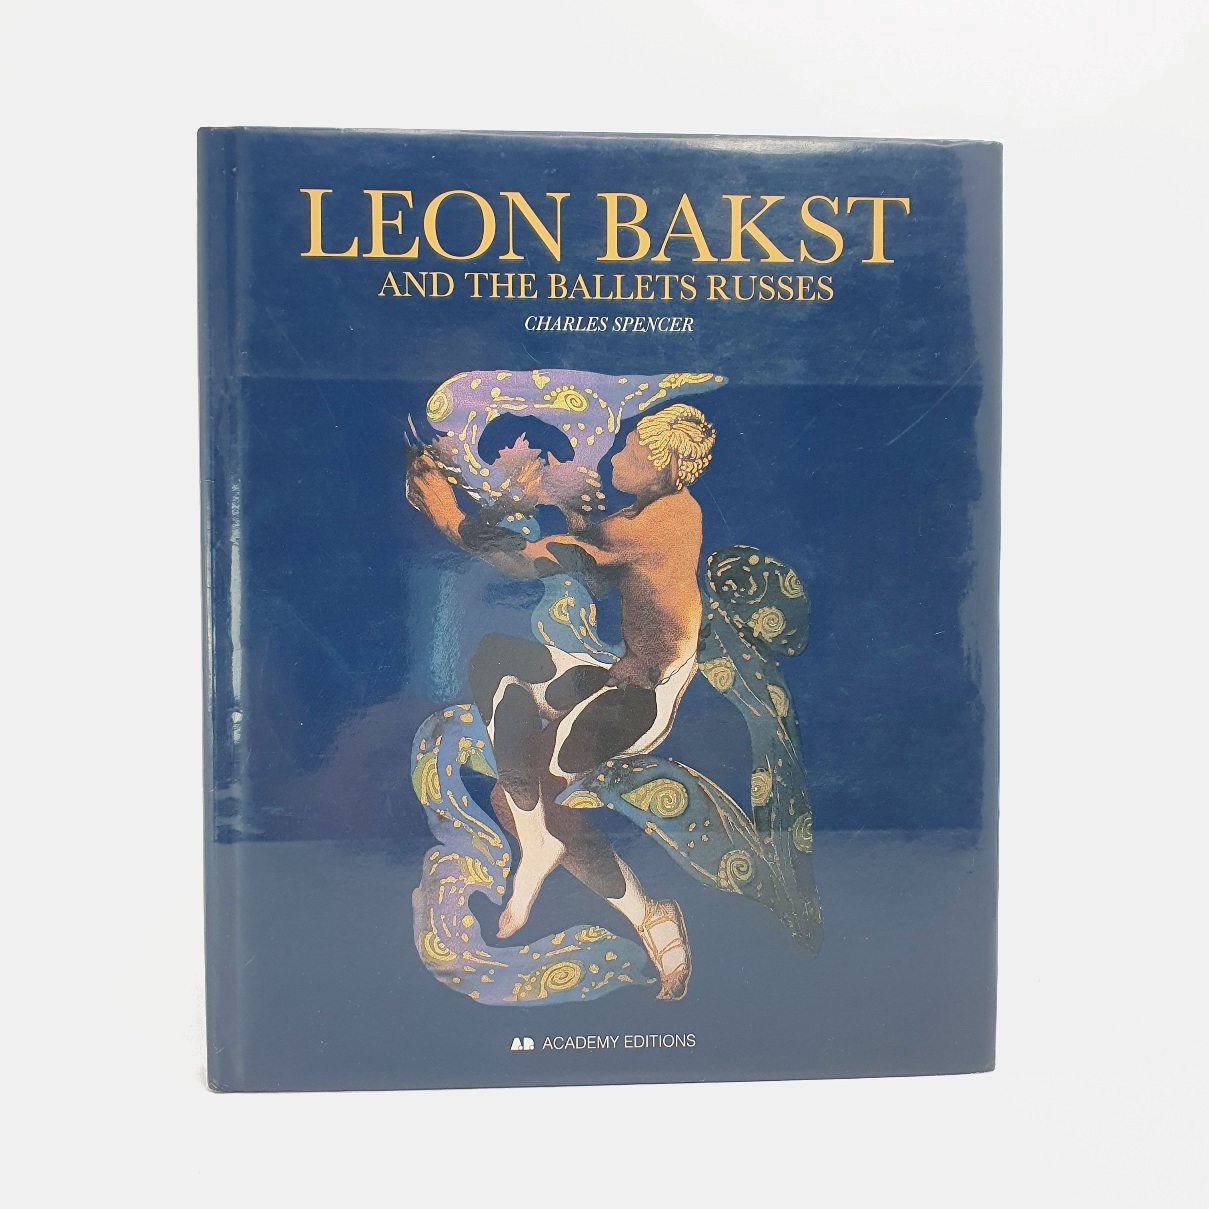 Leon Bakst and the Ballets Russes